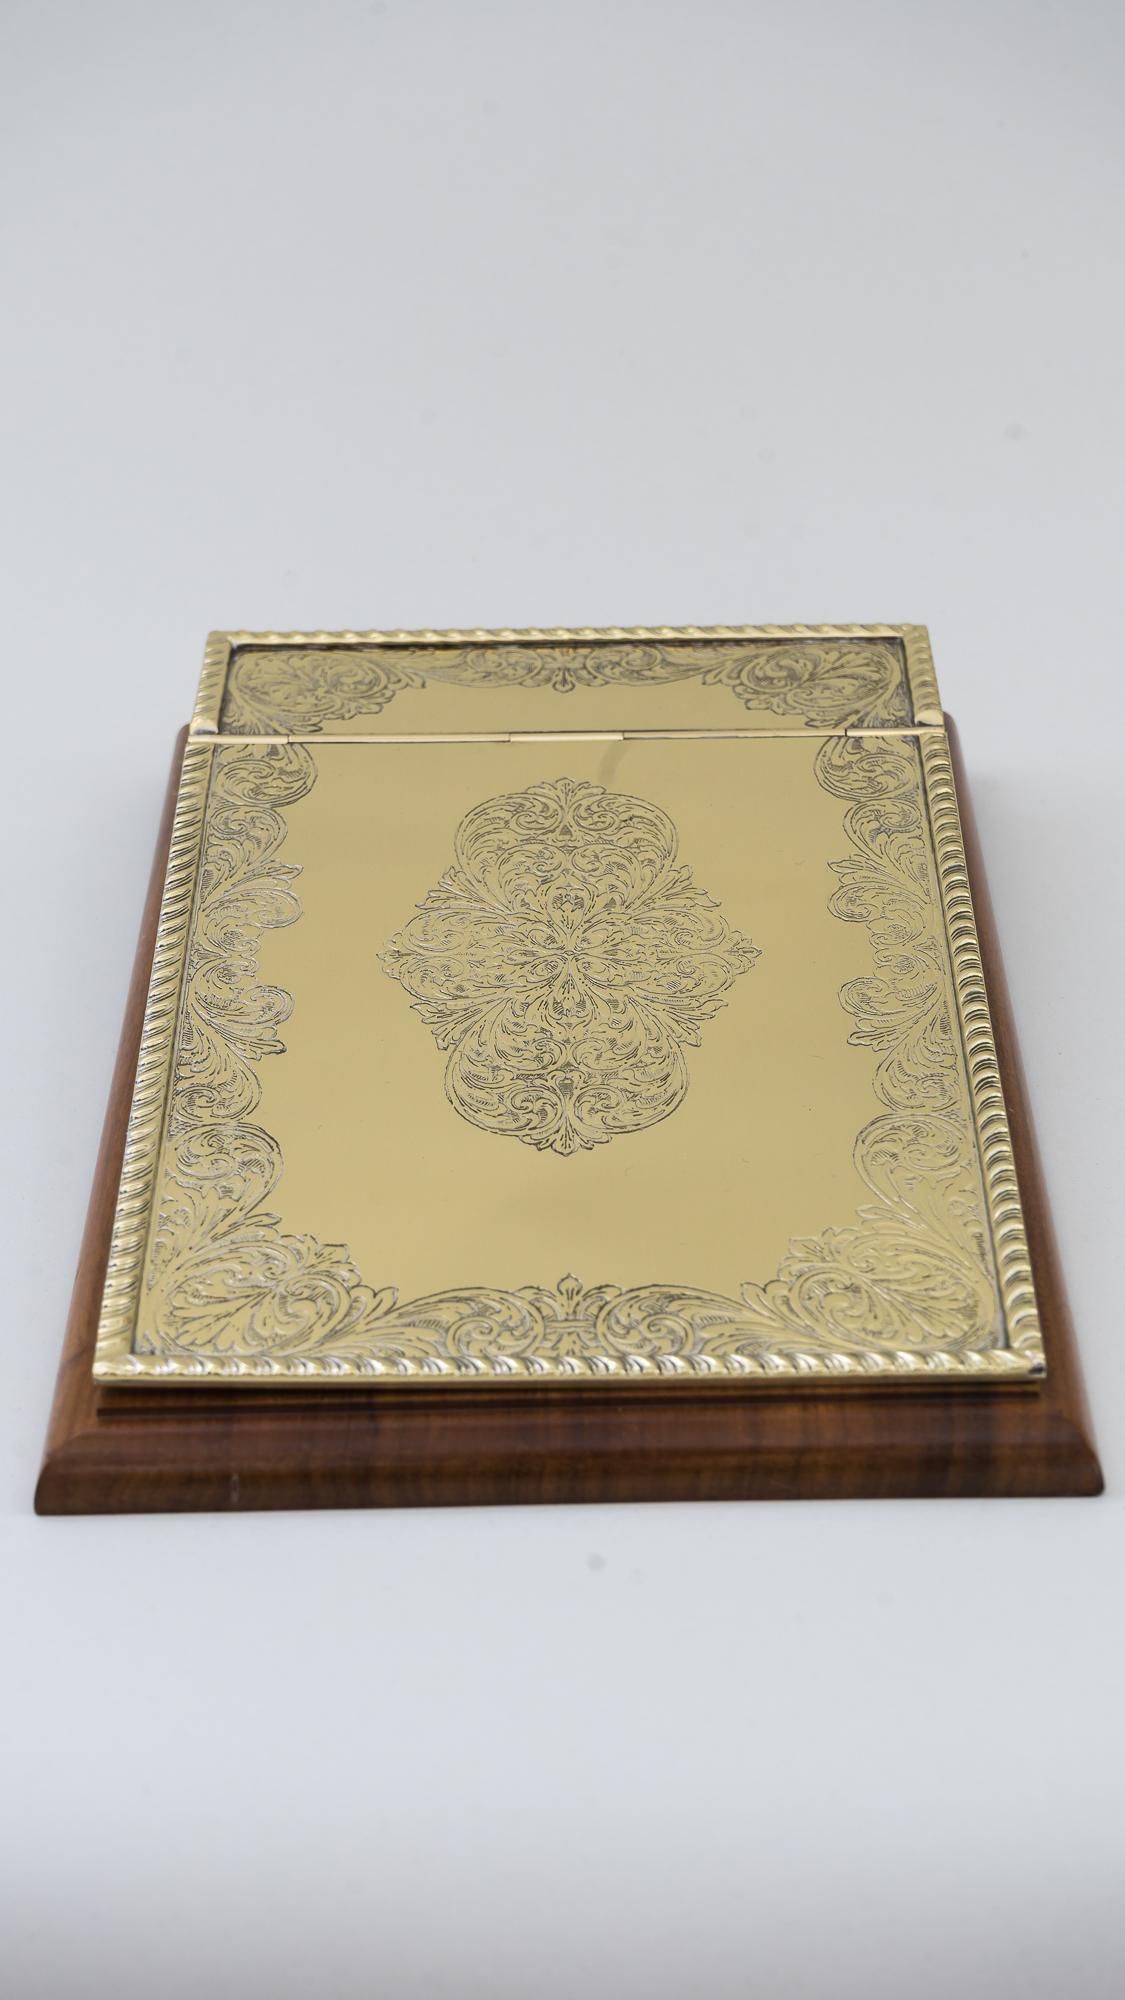 Big Art Deco note pad, circa 1920s
Brass polished and stove enameled
Wood polished.